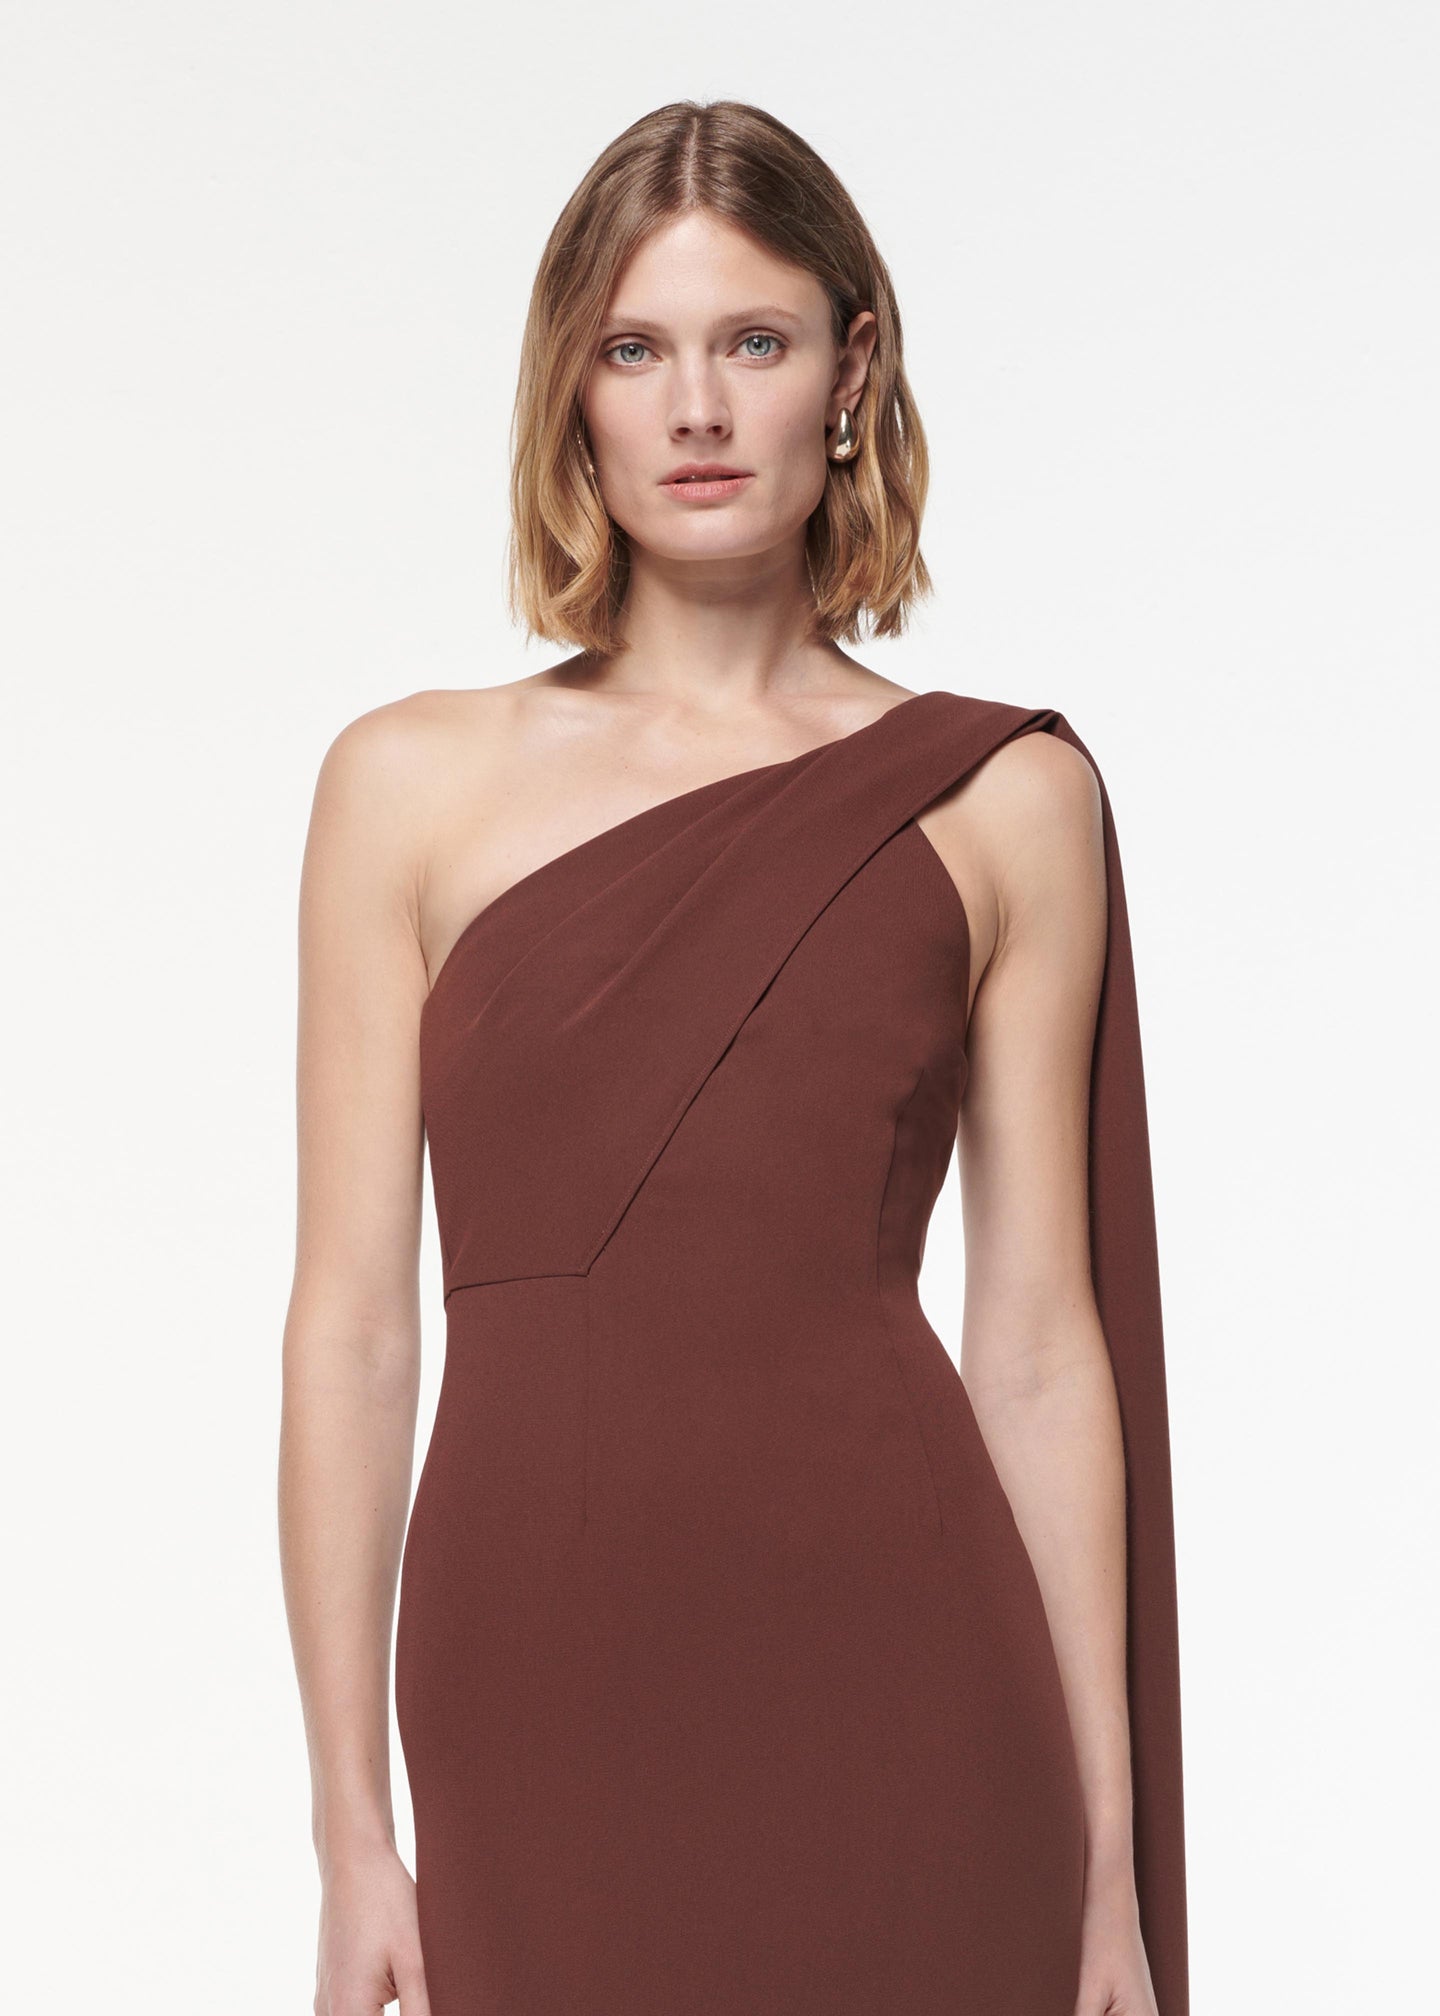 A photograph of a woman wearing a Asymmetric Heavy Cady Midi Dress in Brown